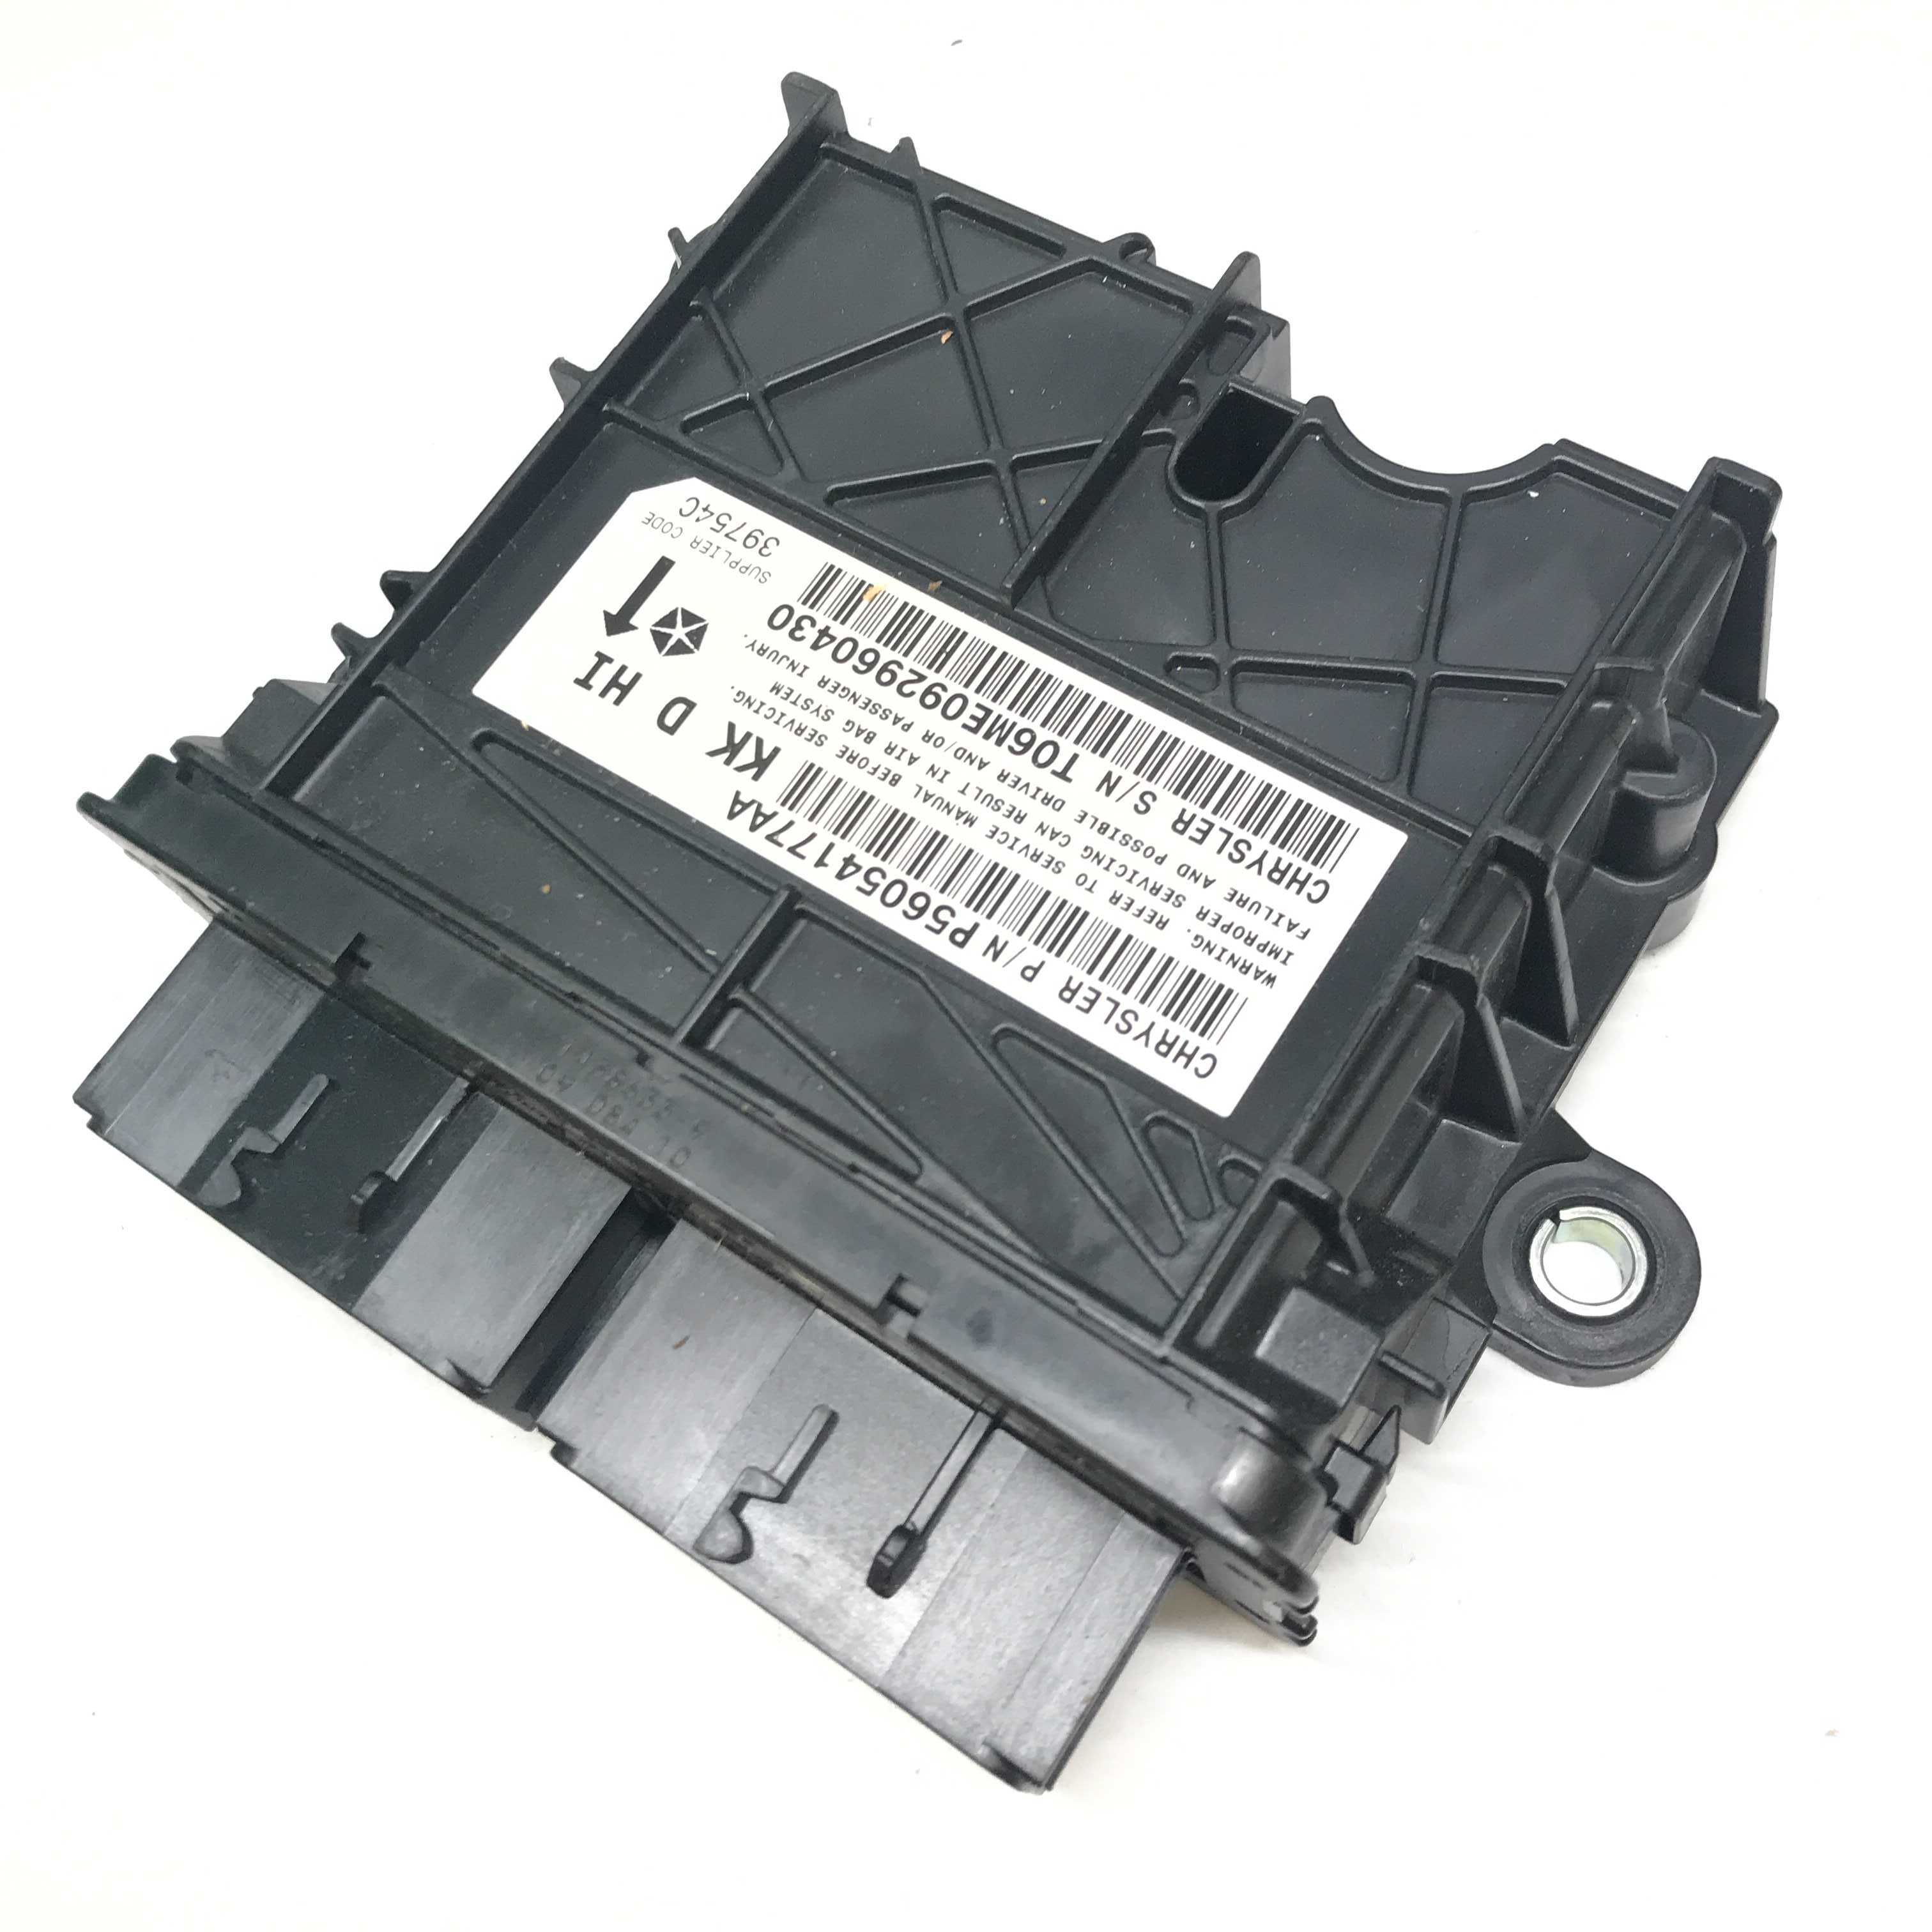 JEEP LIBERTY SRS ORC ORM Occupant Control Module - Airbag Computer Control Module PART #P56054177AA